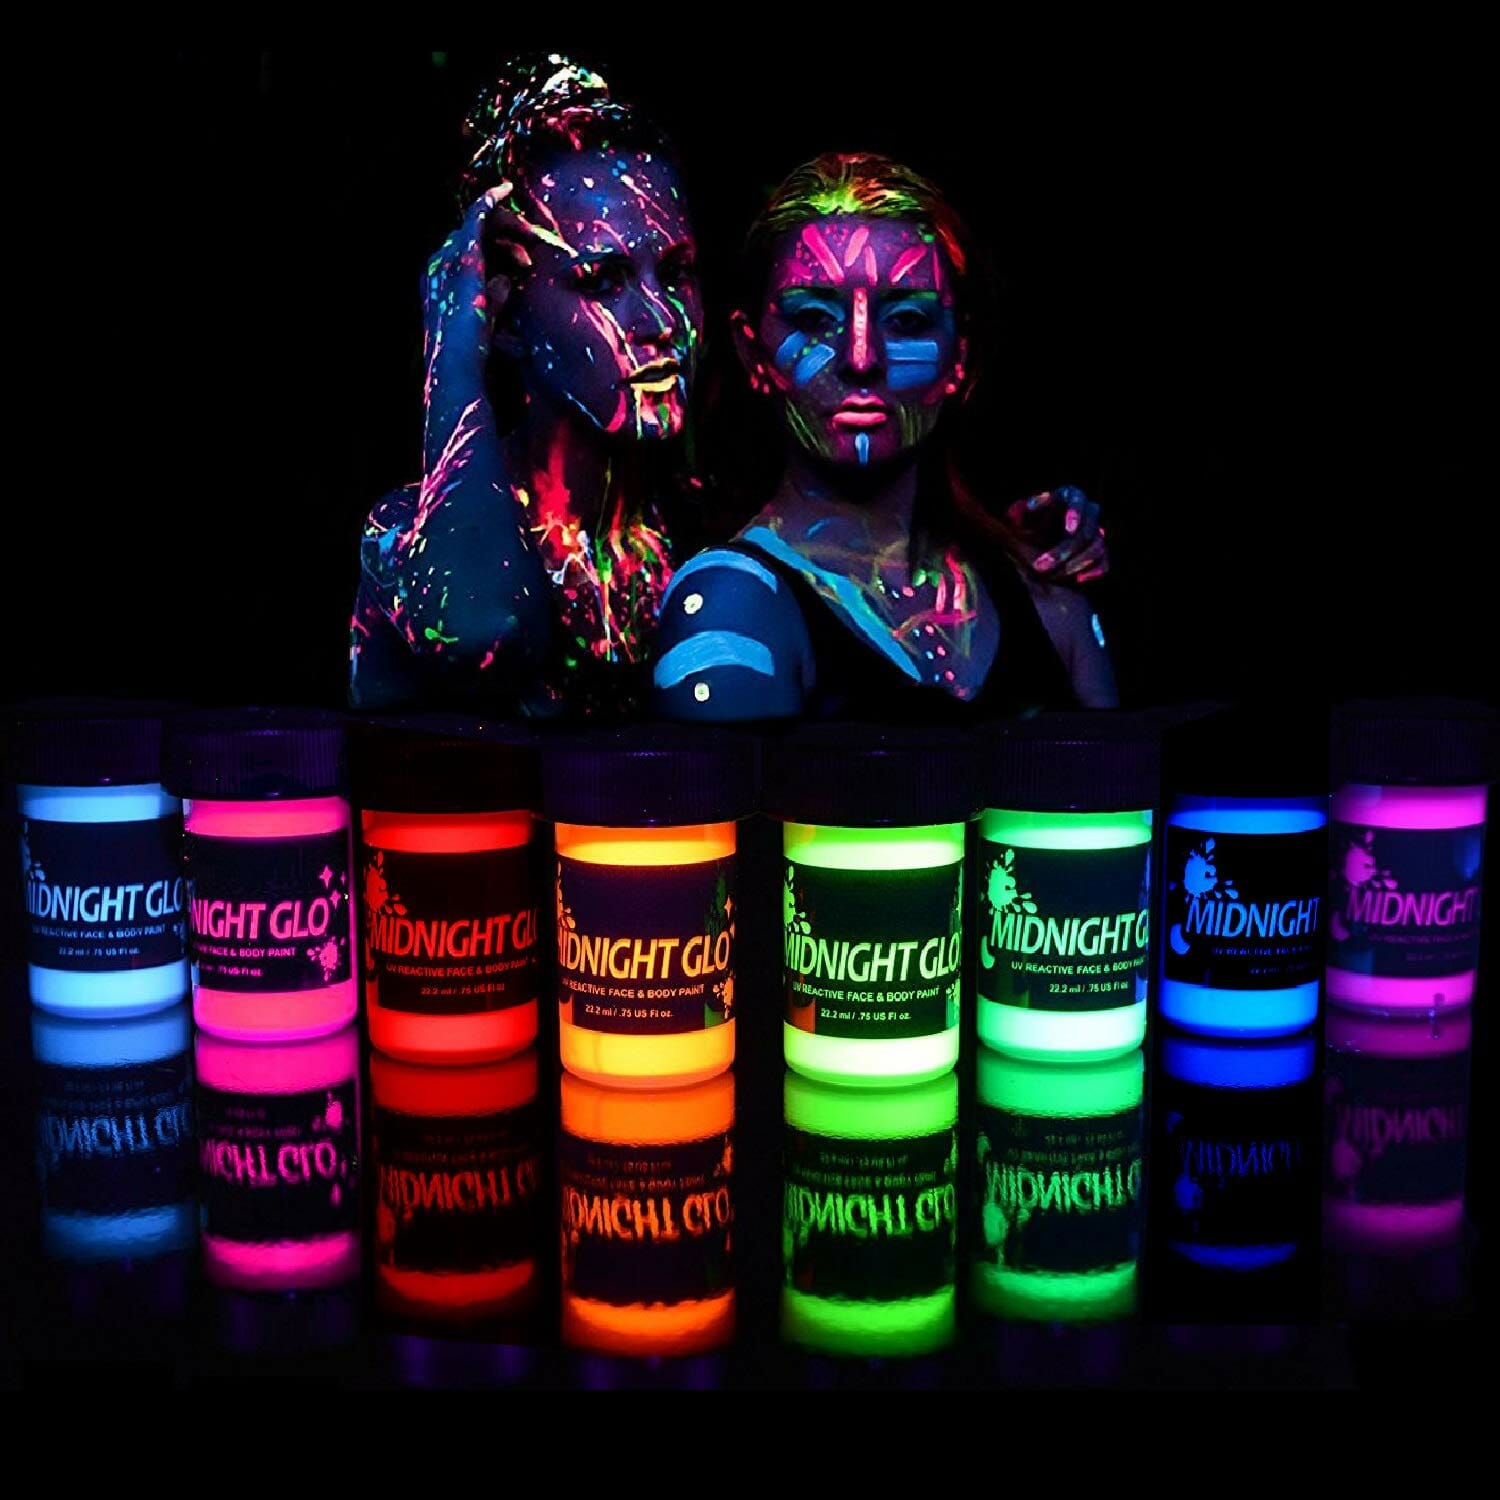 Midnight glo black light face and body paint